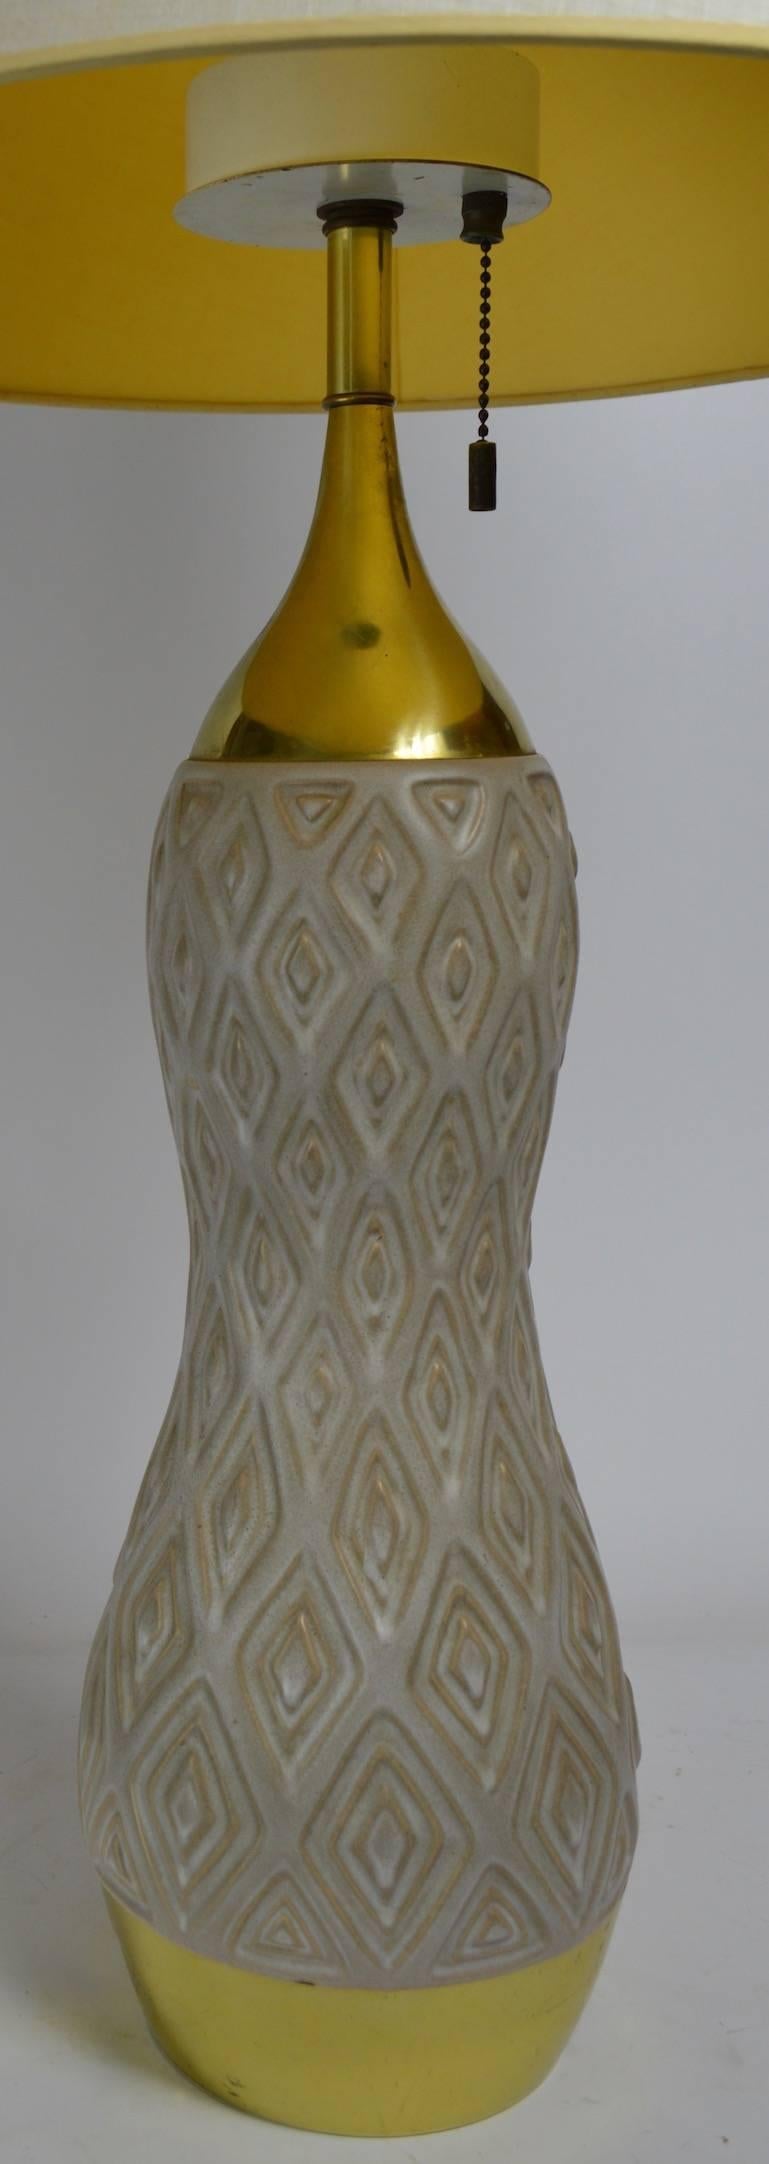 Gerald Thurston for Lightolier Ceramic and Brass Table Lamp For Sale 1